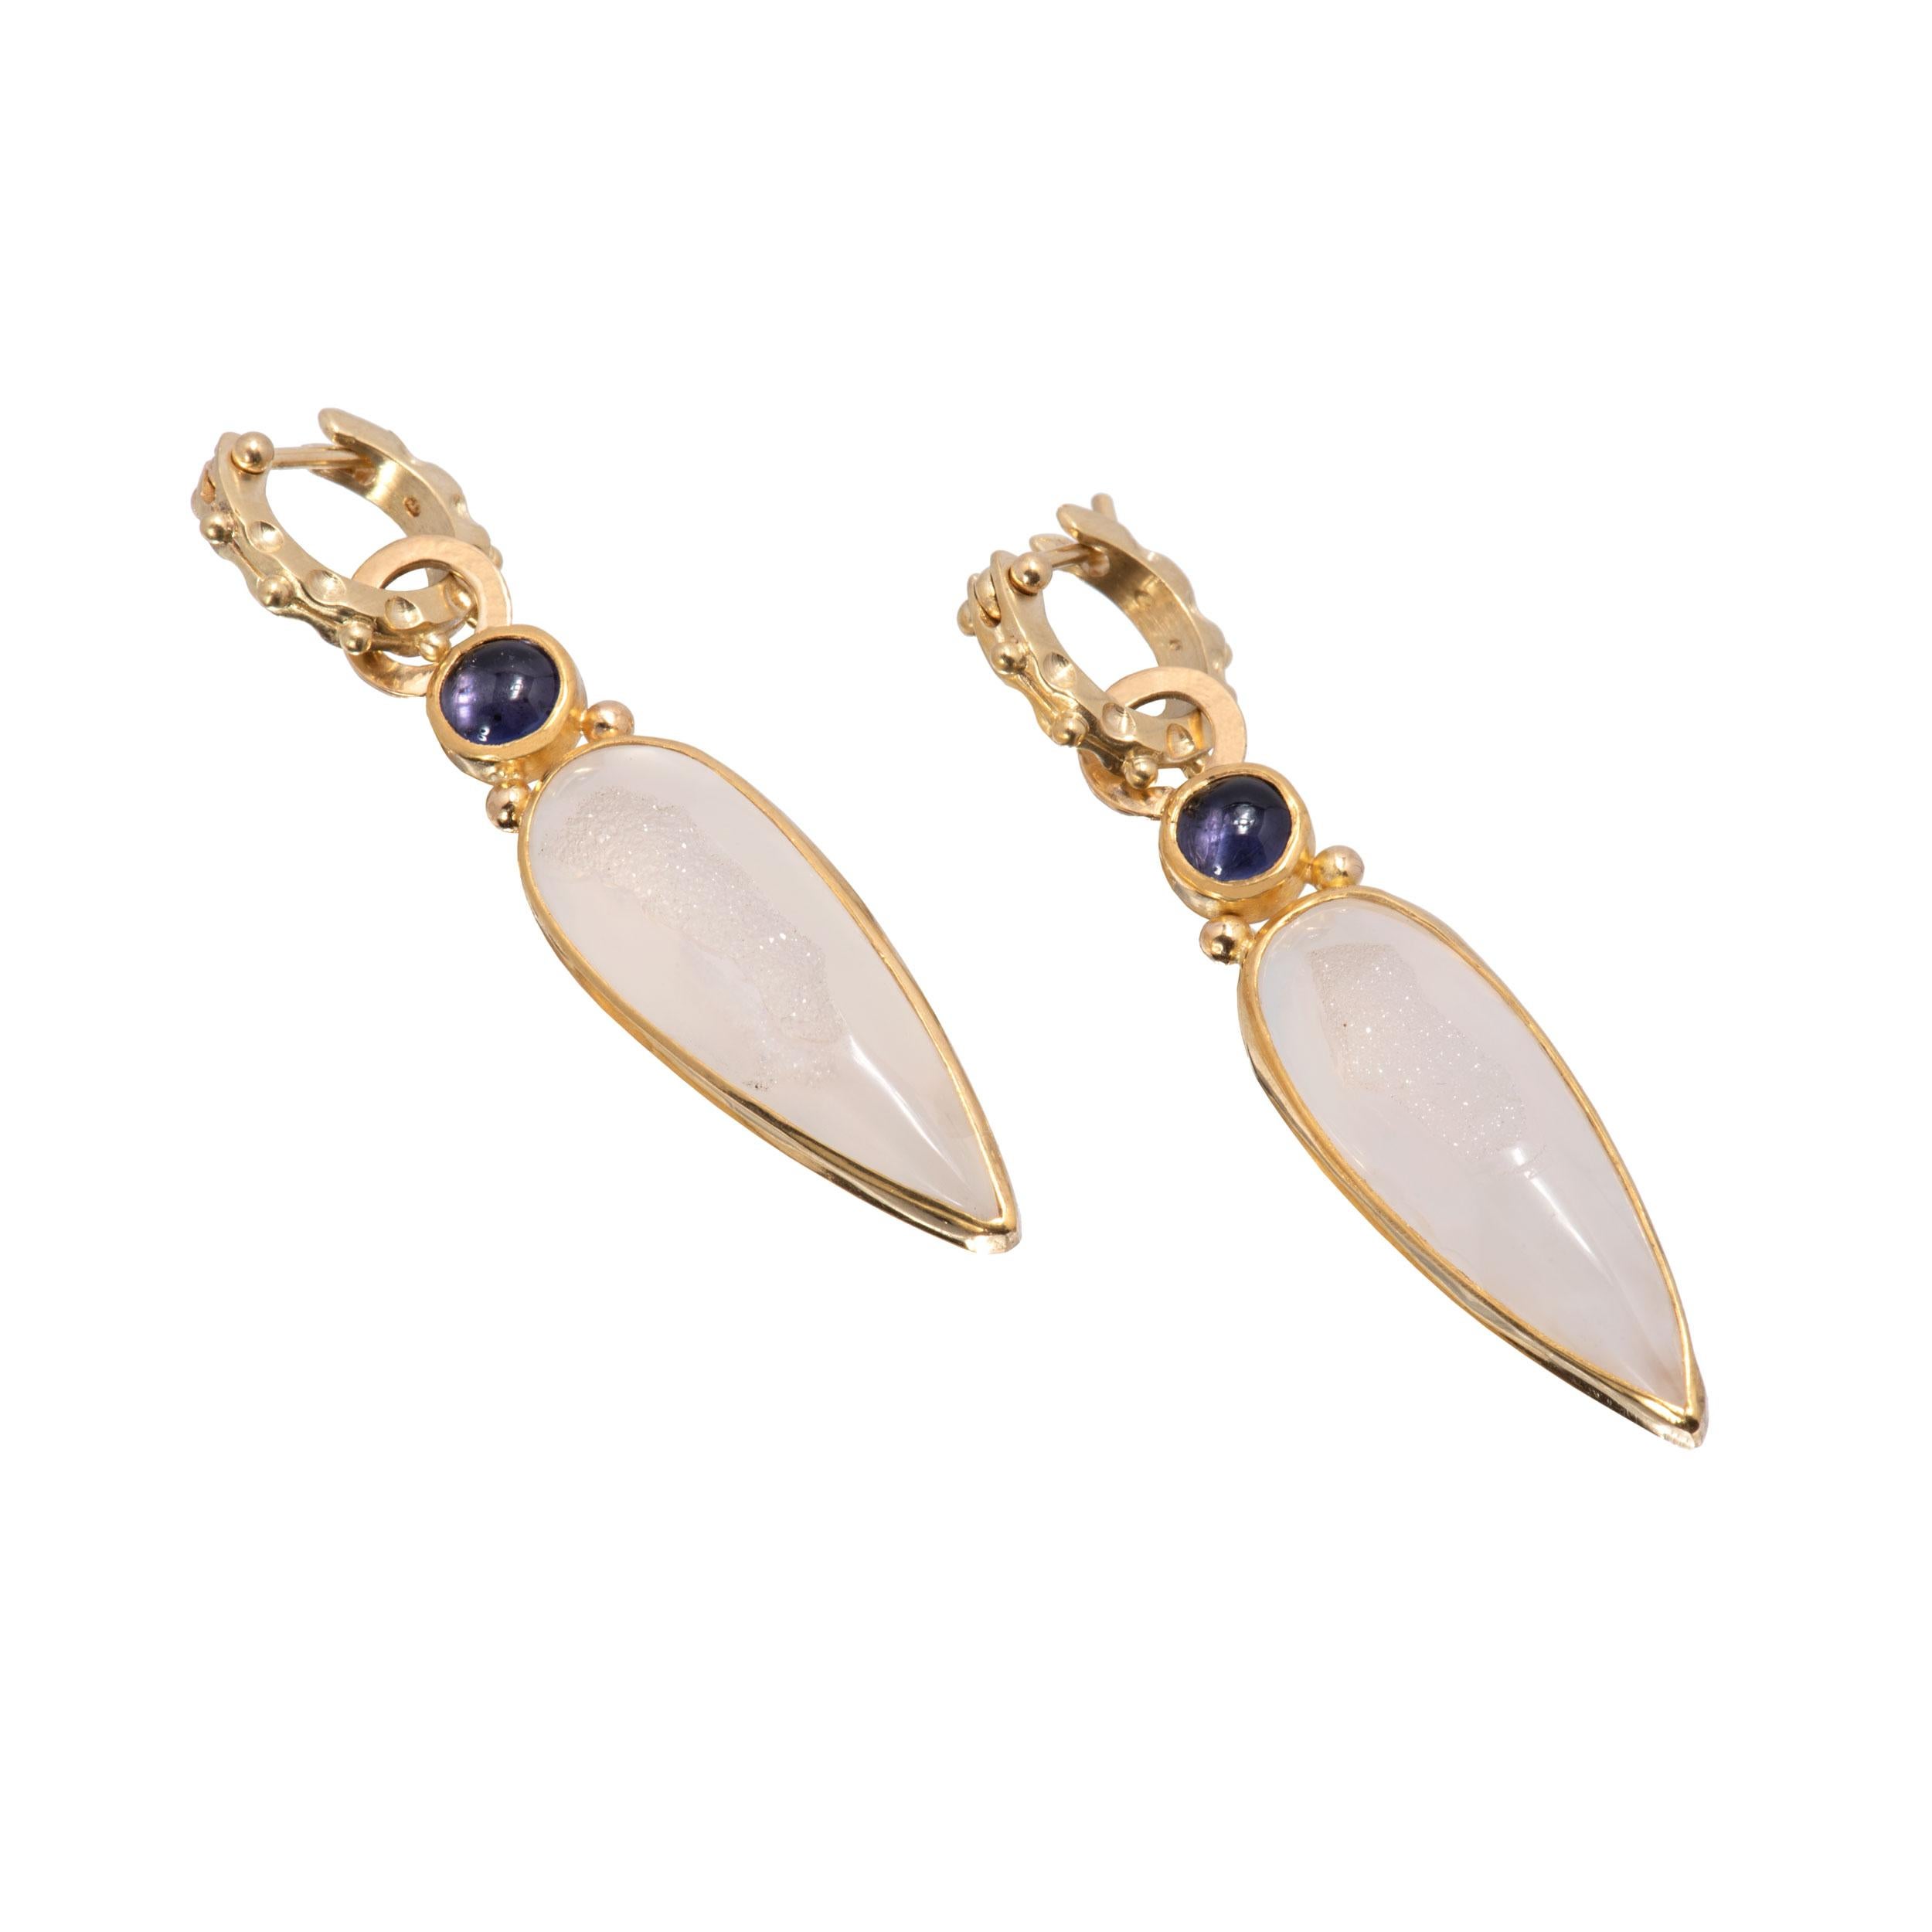 Contemporary Long White Druzy Teardrop Earrings in 18 Karat Gold with Iolite Cabochons